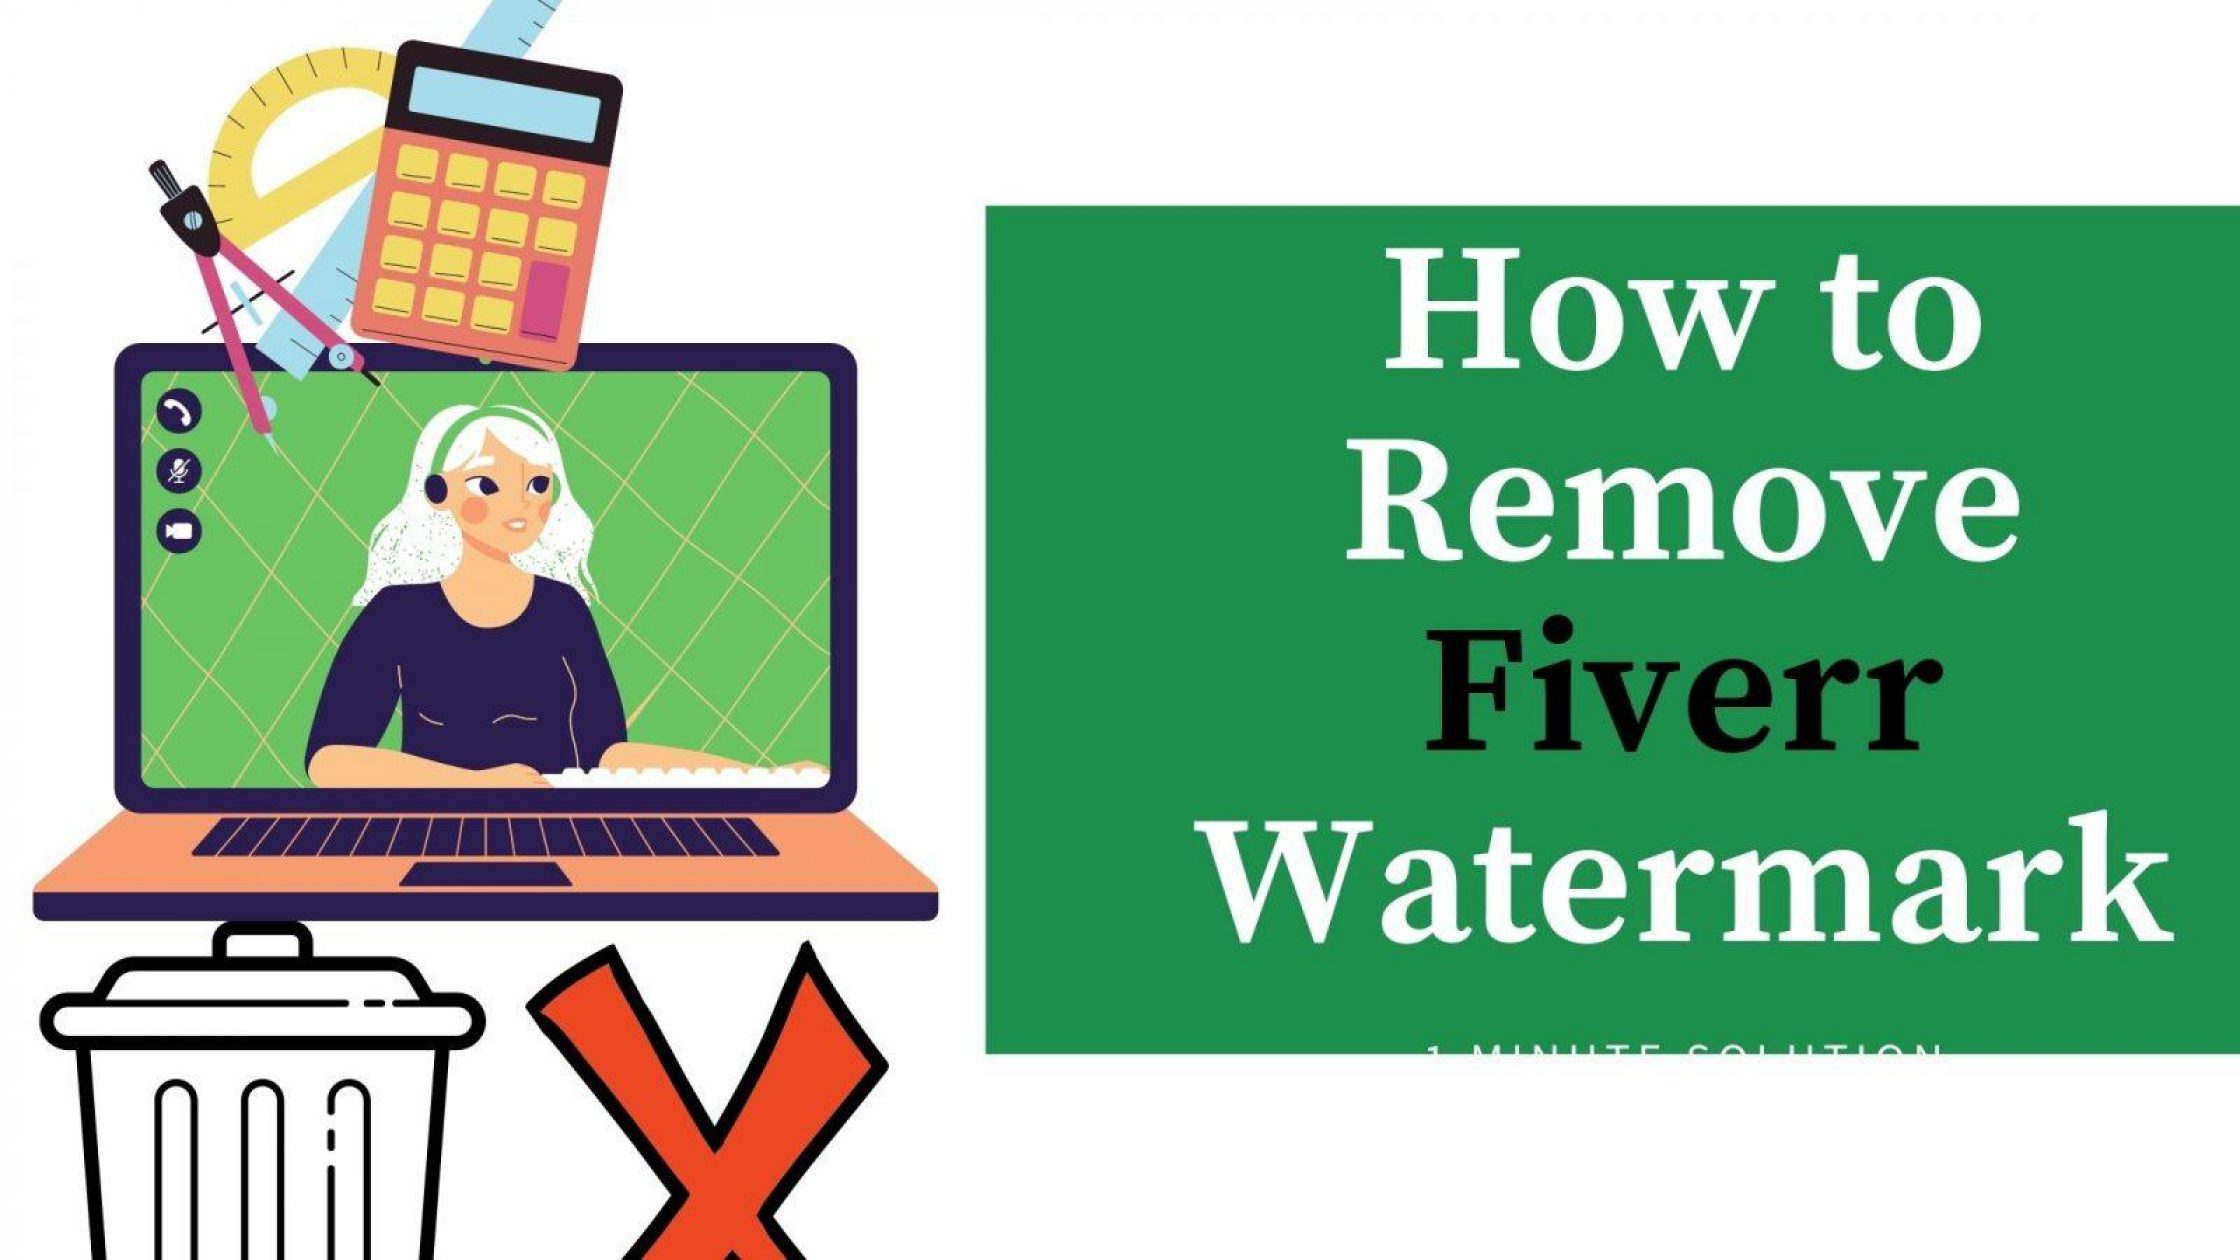 How to Remove Fiverr Watermark? 1 Minute Solution